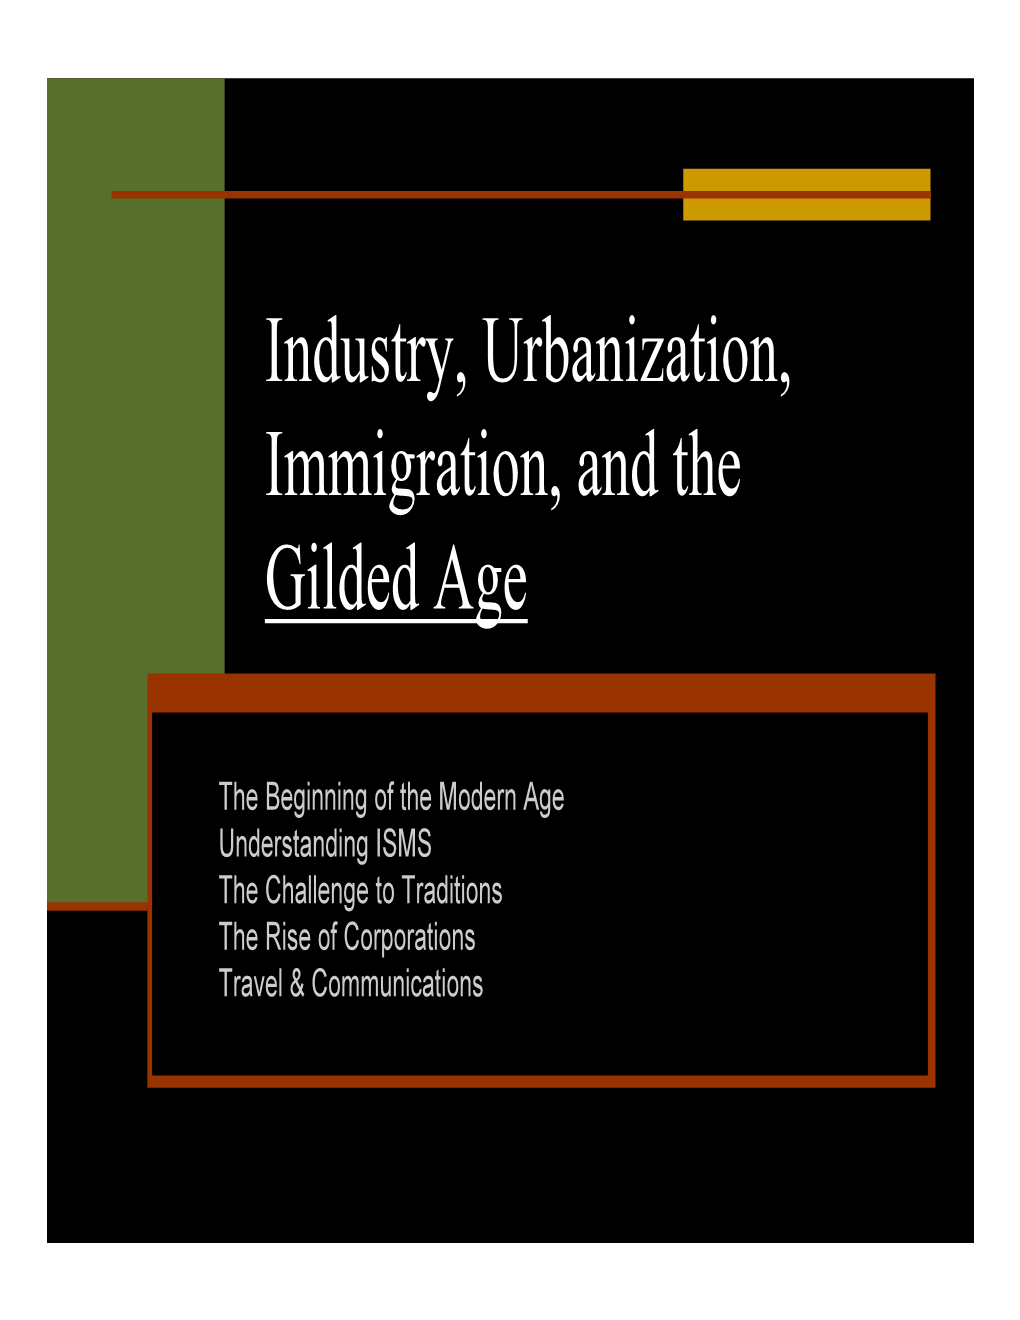 Industry, Urbanization, Immigration, and the Gilded Age